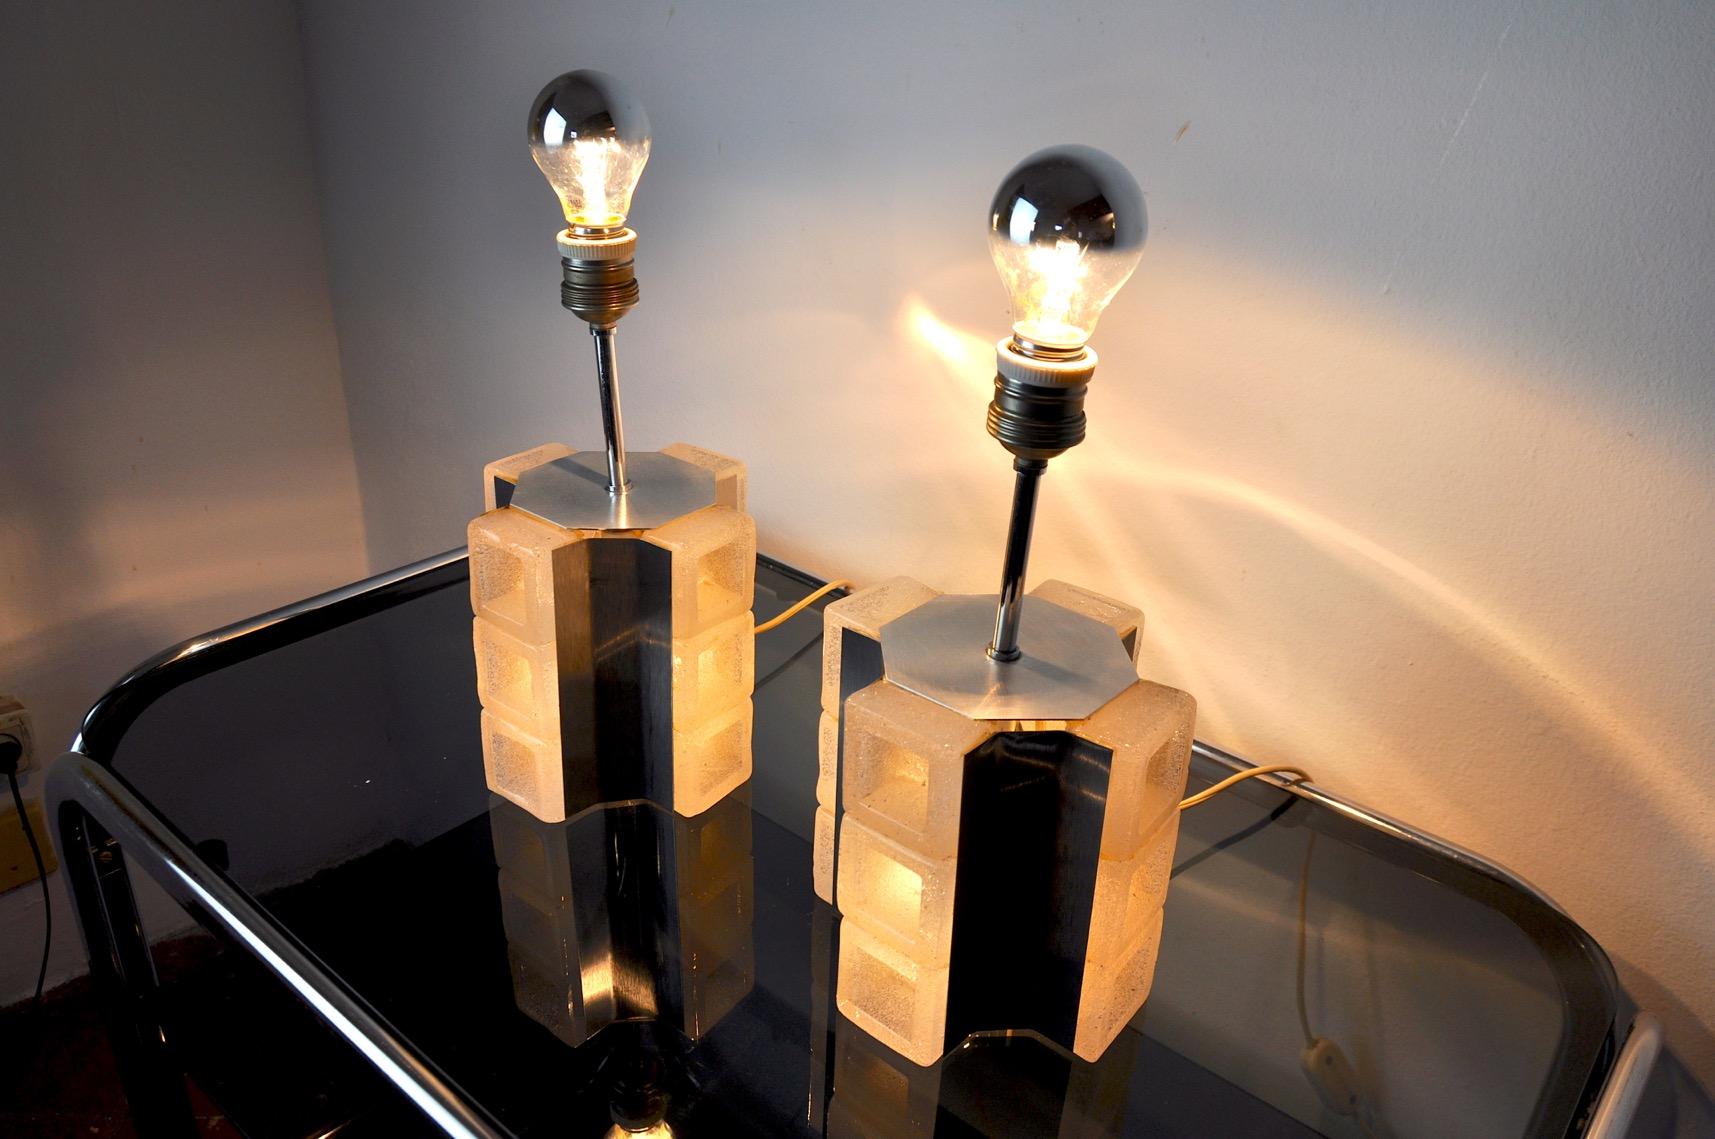 Italian Pair of Poliarte Cubic Lamps by Albano Poli, Murano Glass, Italy, 1960 For Sale